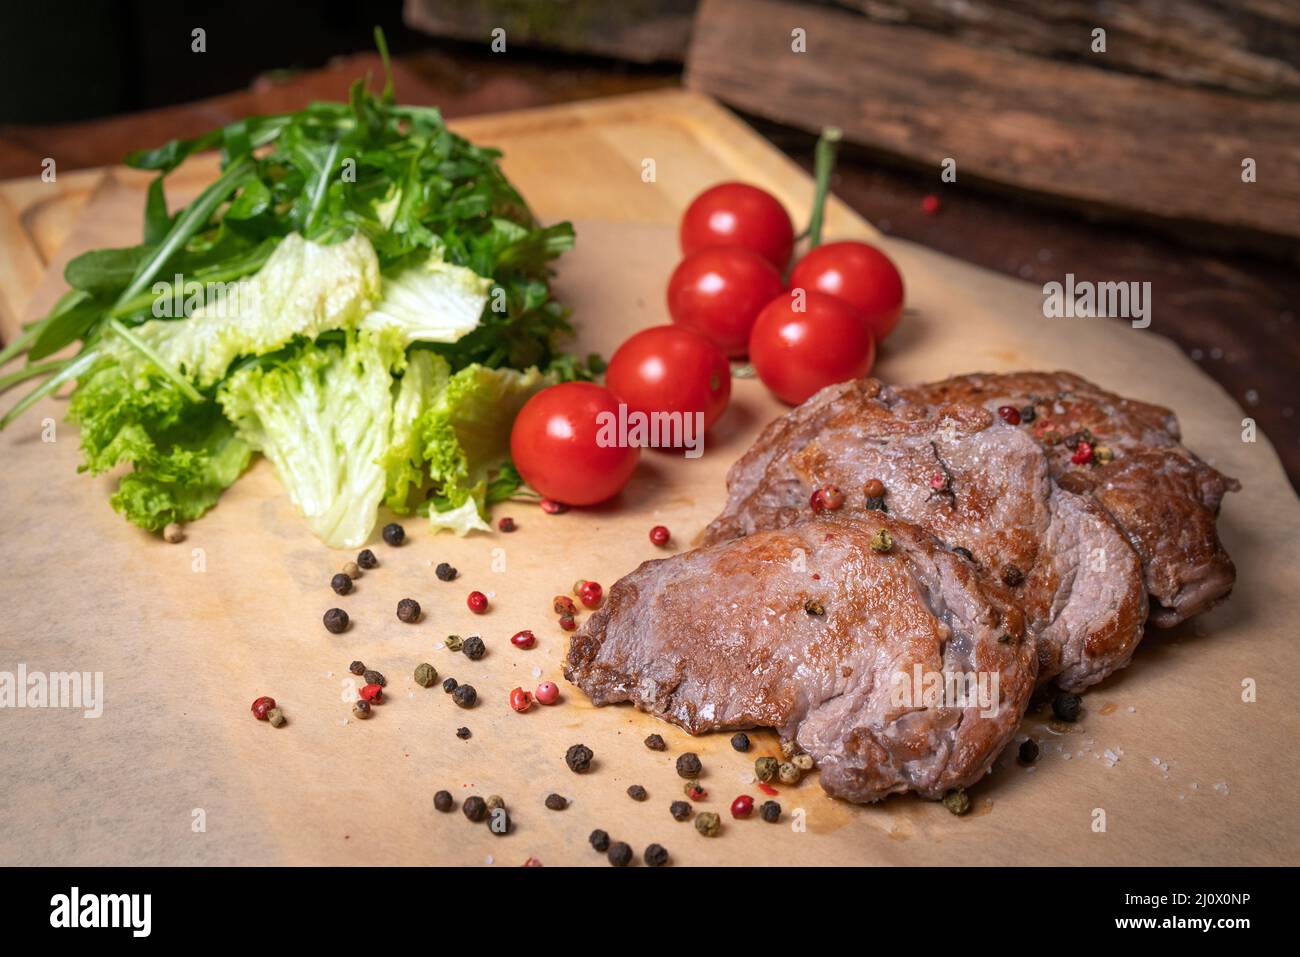 Pork fillets are served with barbecue sauce, soy sauce, cherry tomatoes, lettuce salad with arugula-seeded pepper mixture. Resta Stock Photo